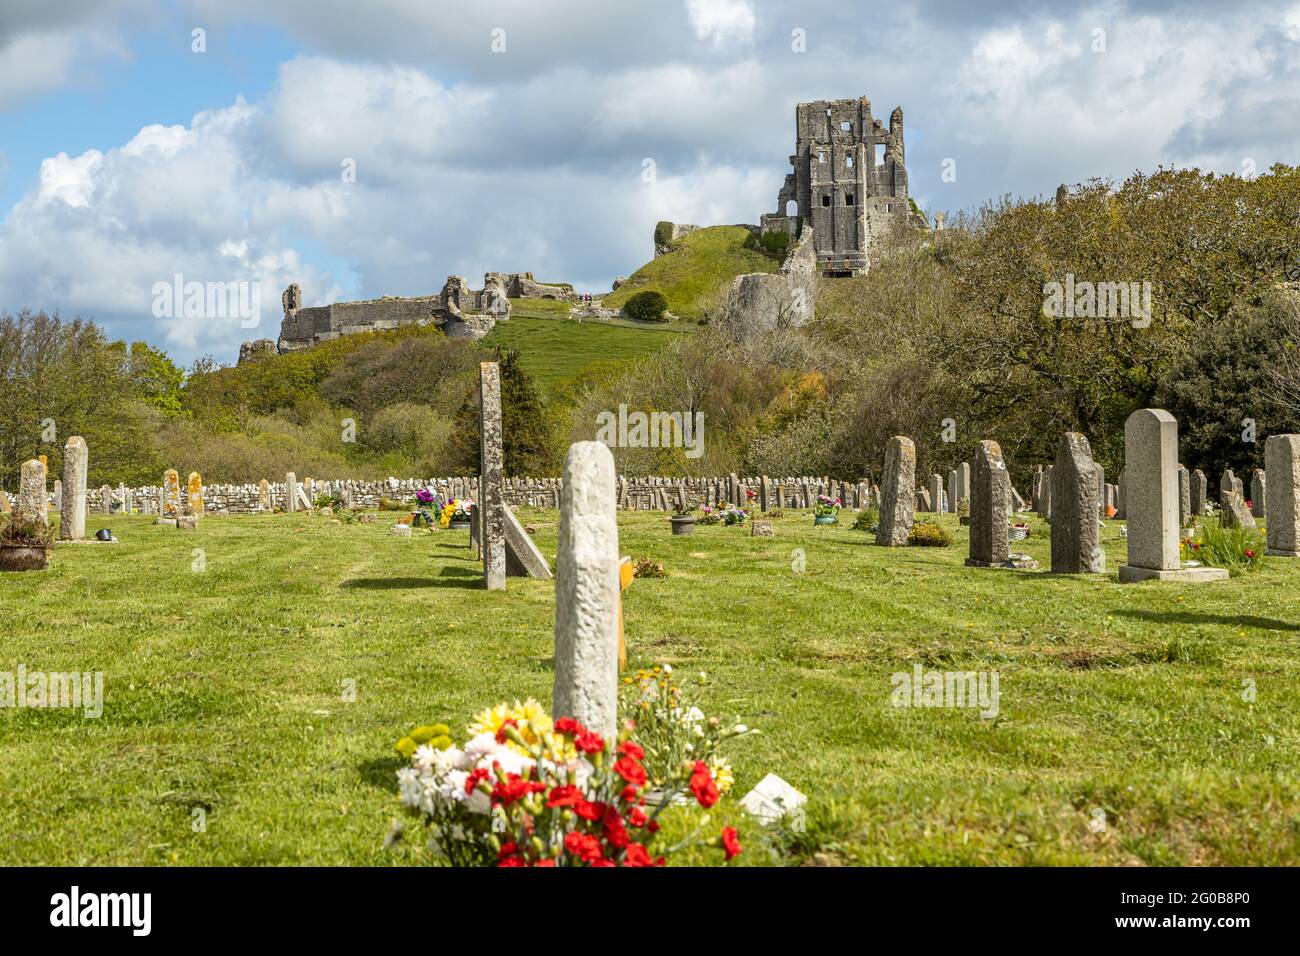 Corfe Castle a Saxon stronghold nestling in the picturesque landscapes of the Purbeck hills overlooks the village graveyard , Dorset England UK Stock Photo